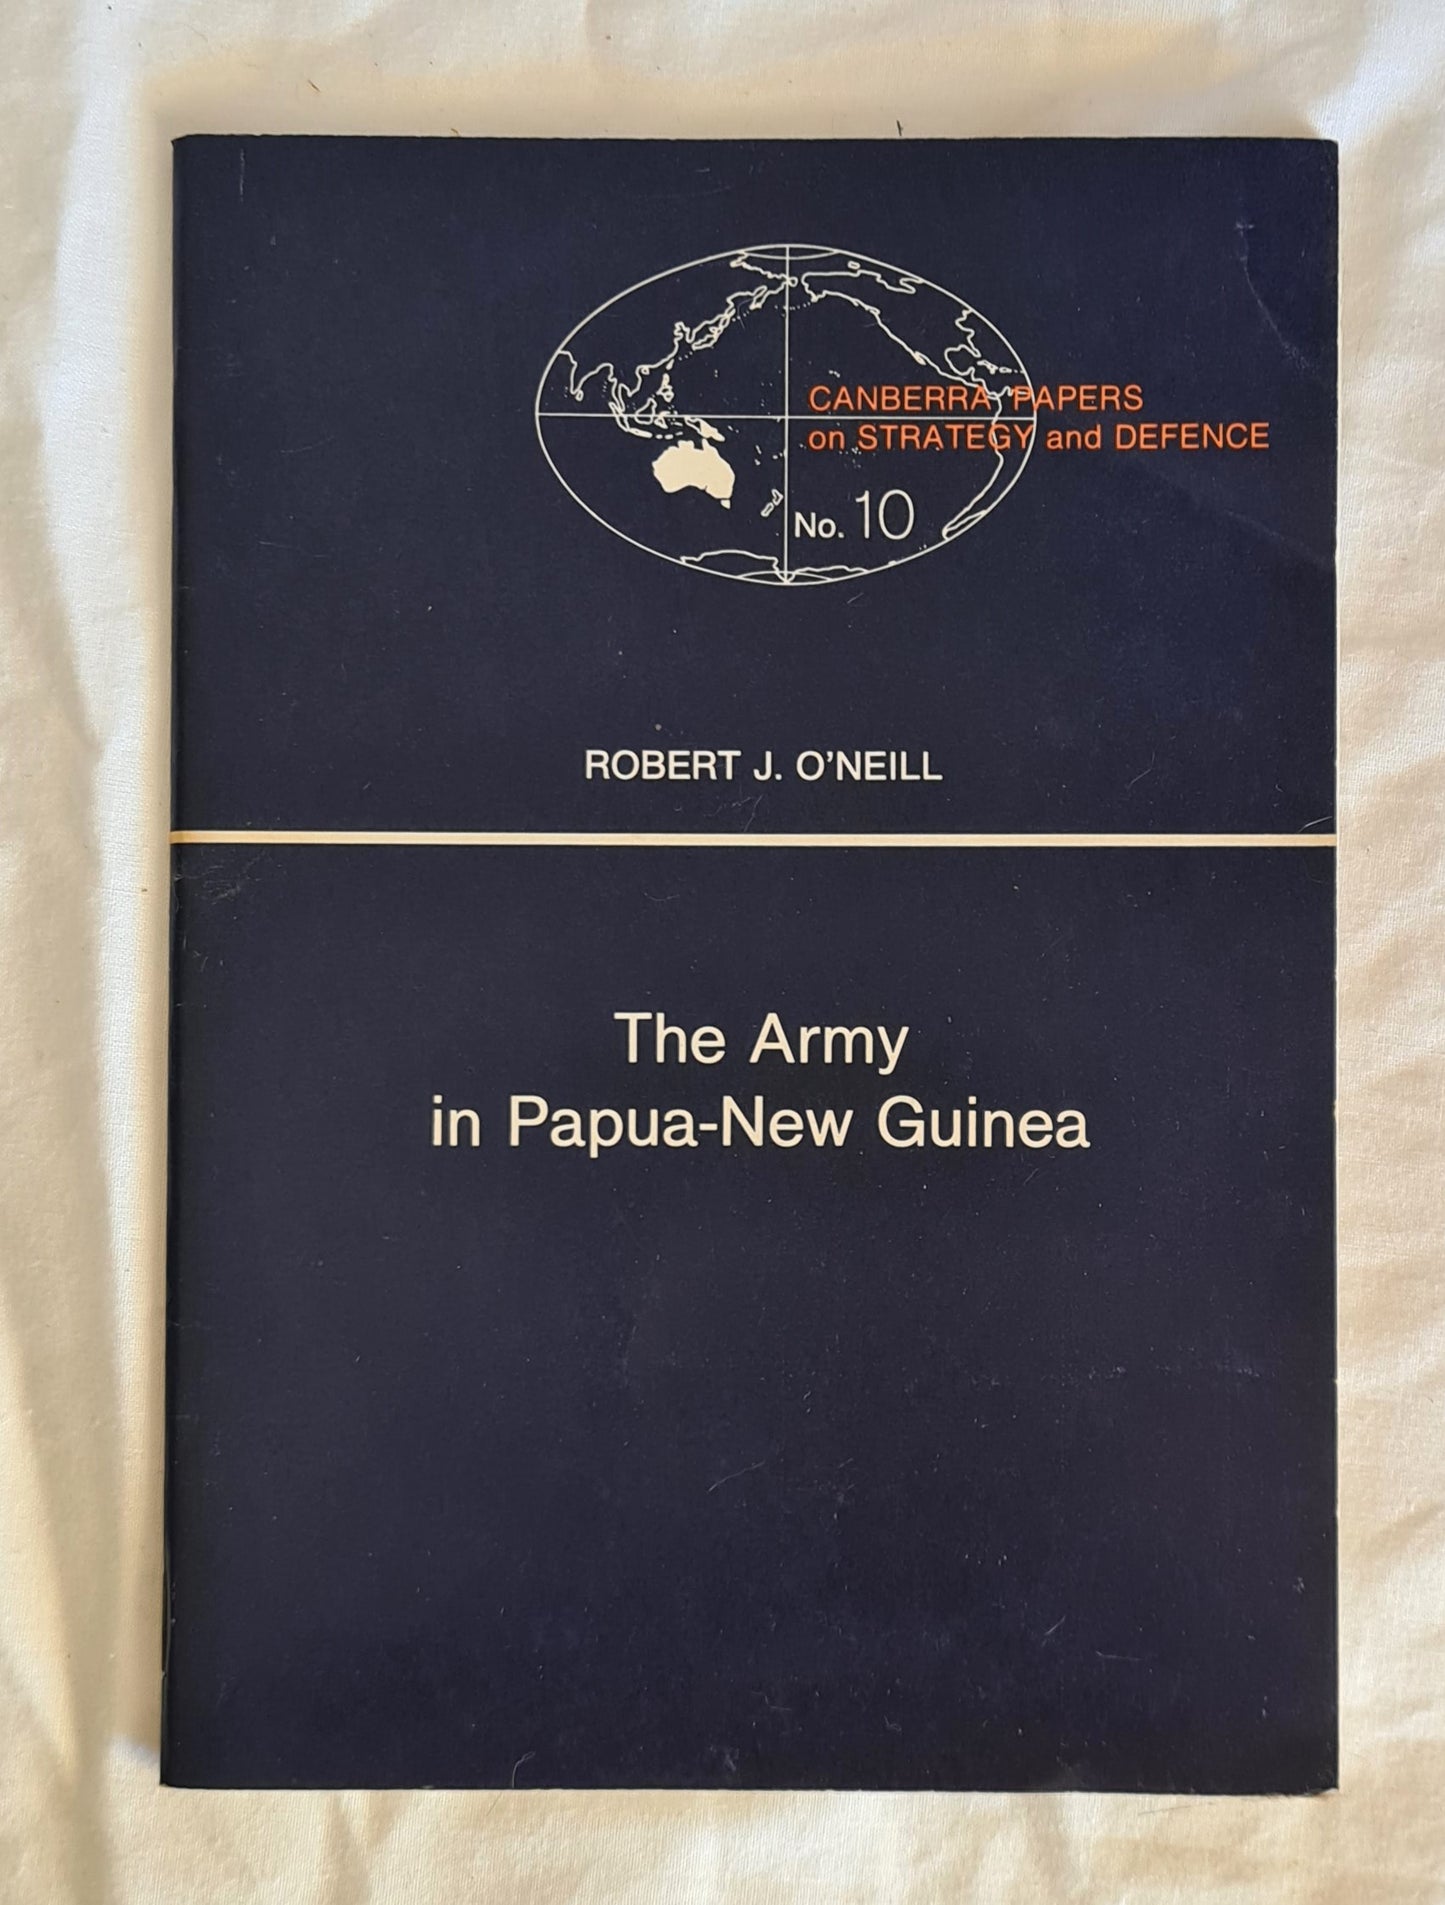 The Army in Papua New Guinea  Current Role and Implications for Independence  by Robert J. O’Neill  (Canberra Papers on Strategy and Defence No. 10)